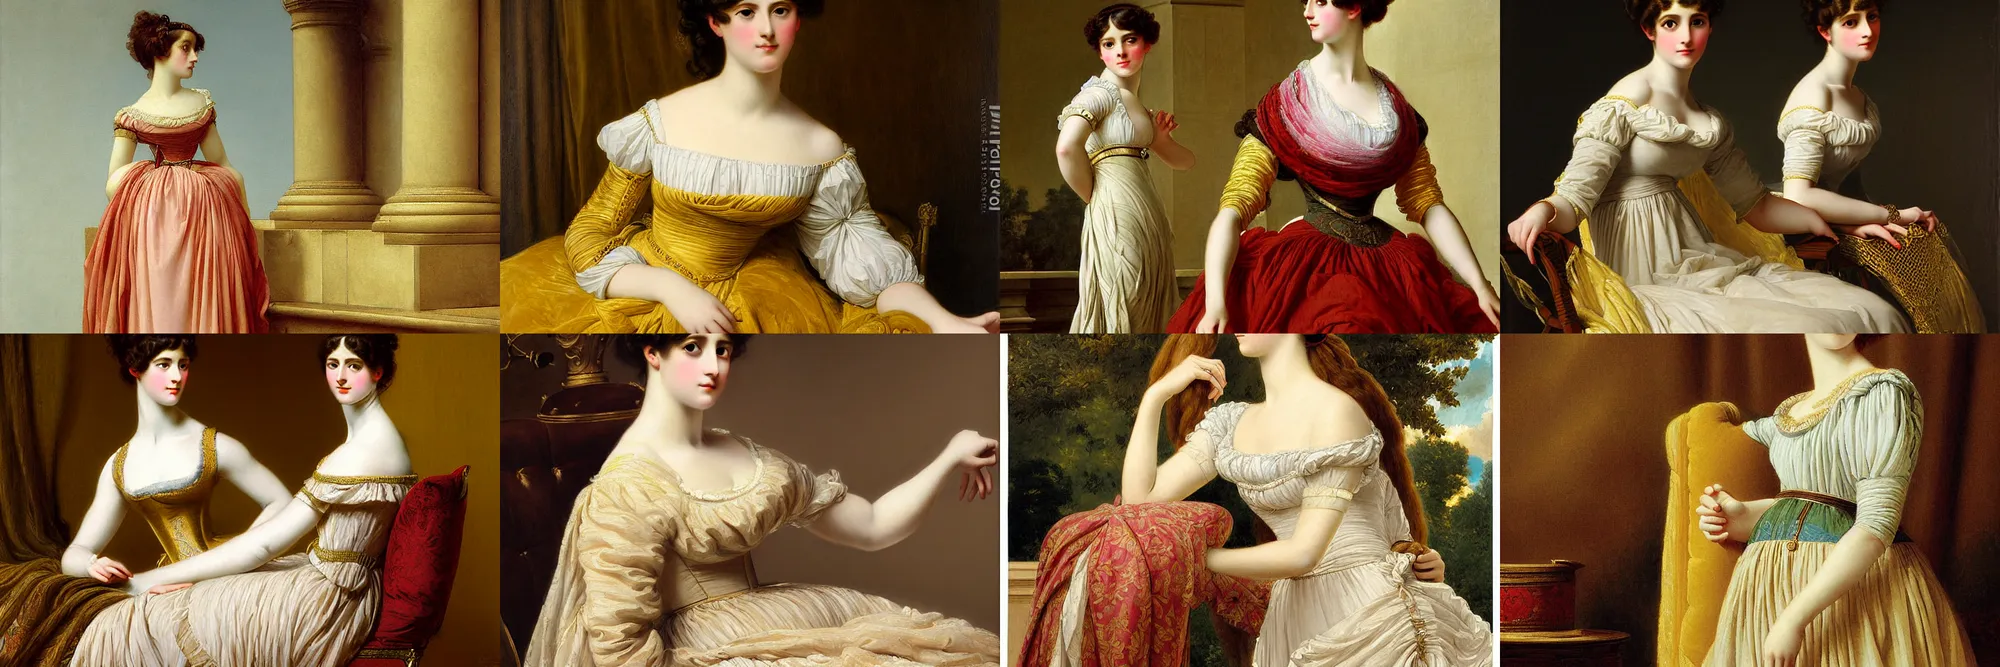 Prompt: exquisite painting of regency - era girl by vittorio reggianini, by frederic soulacroix, georgian dress, 1 8 1 0 s fashion, amazing fabric,